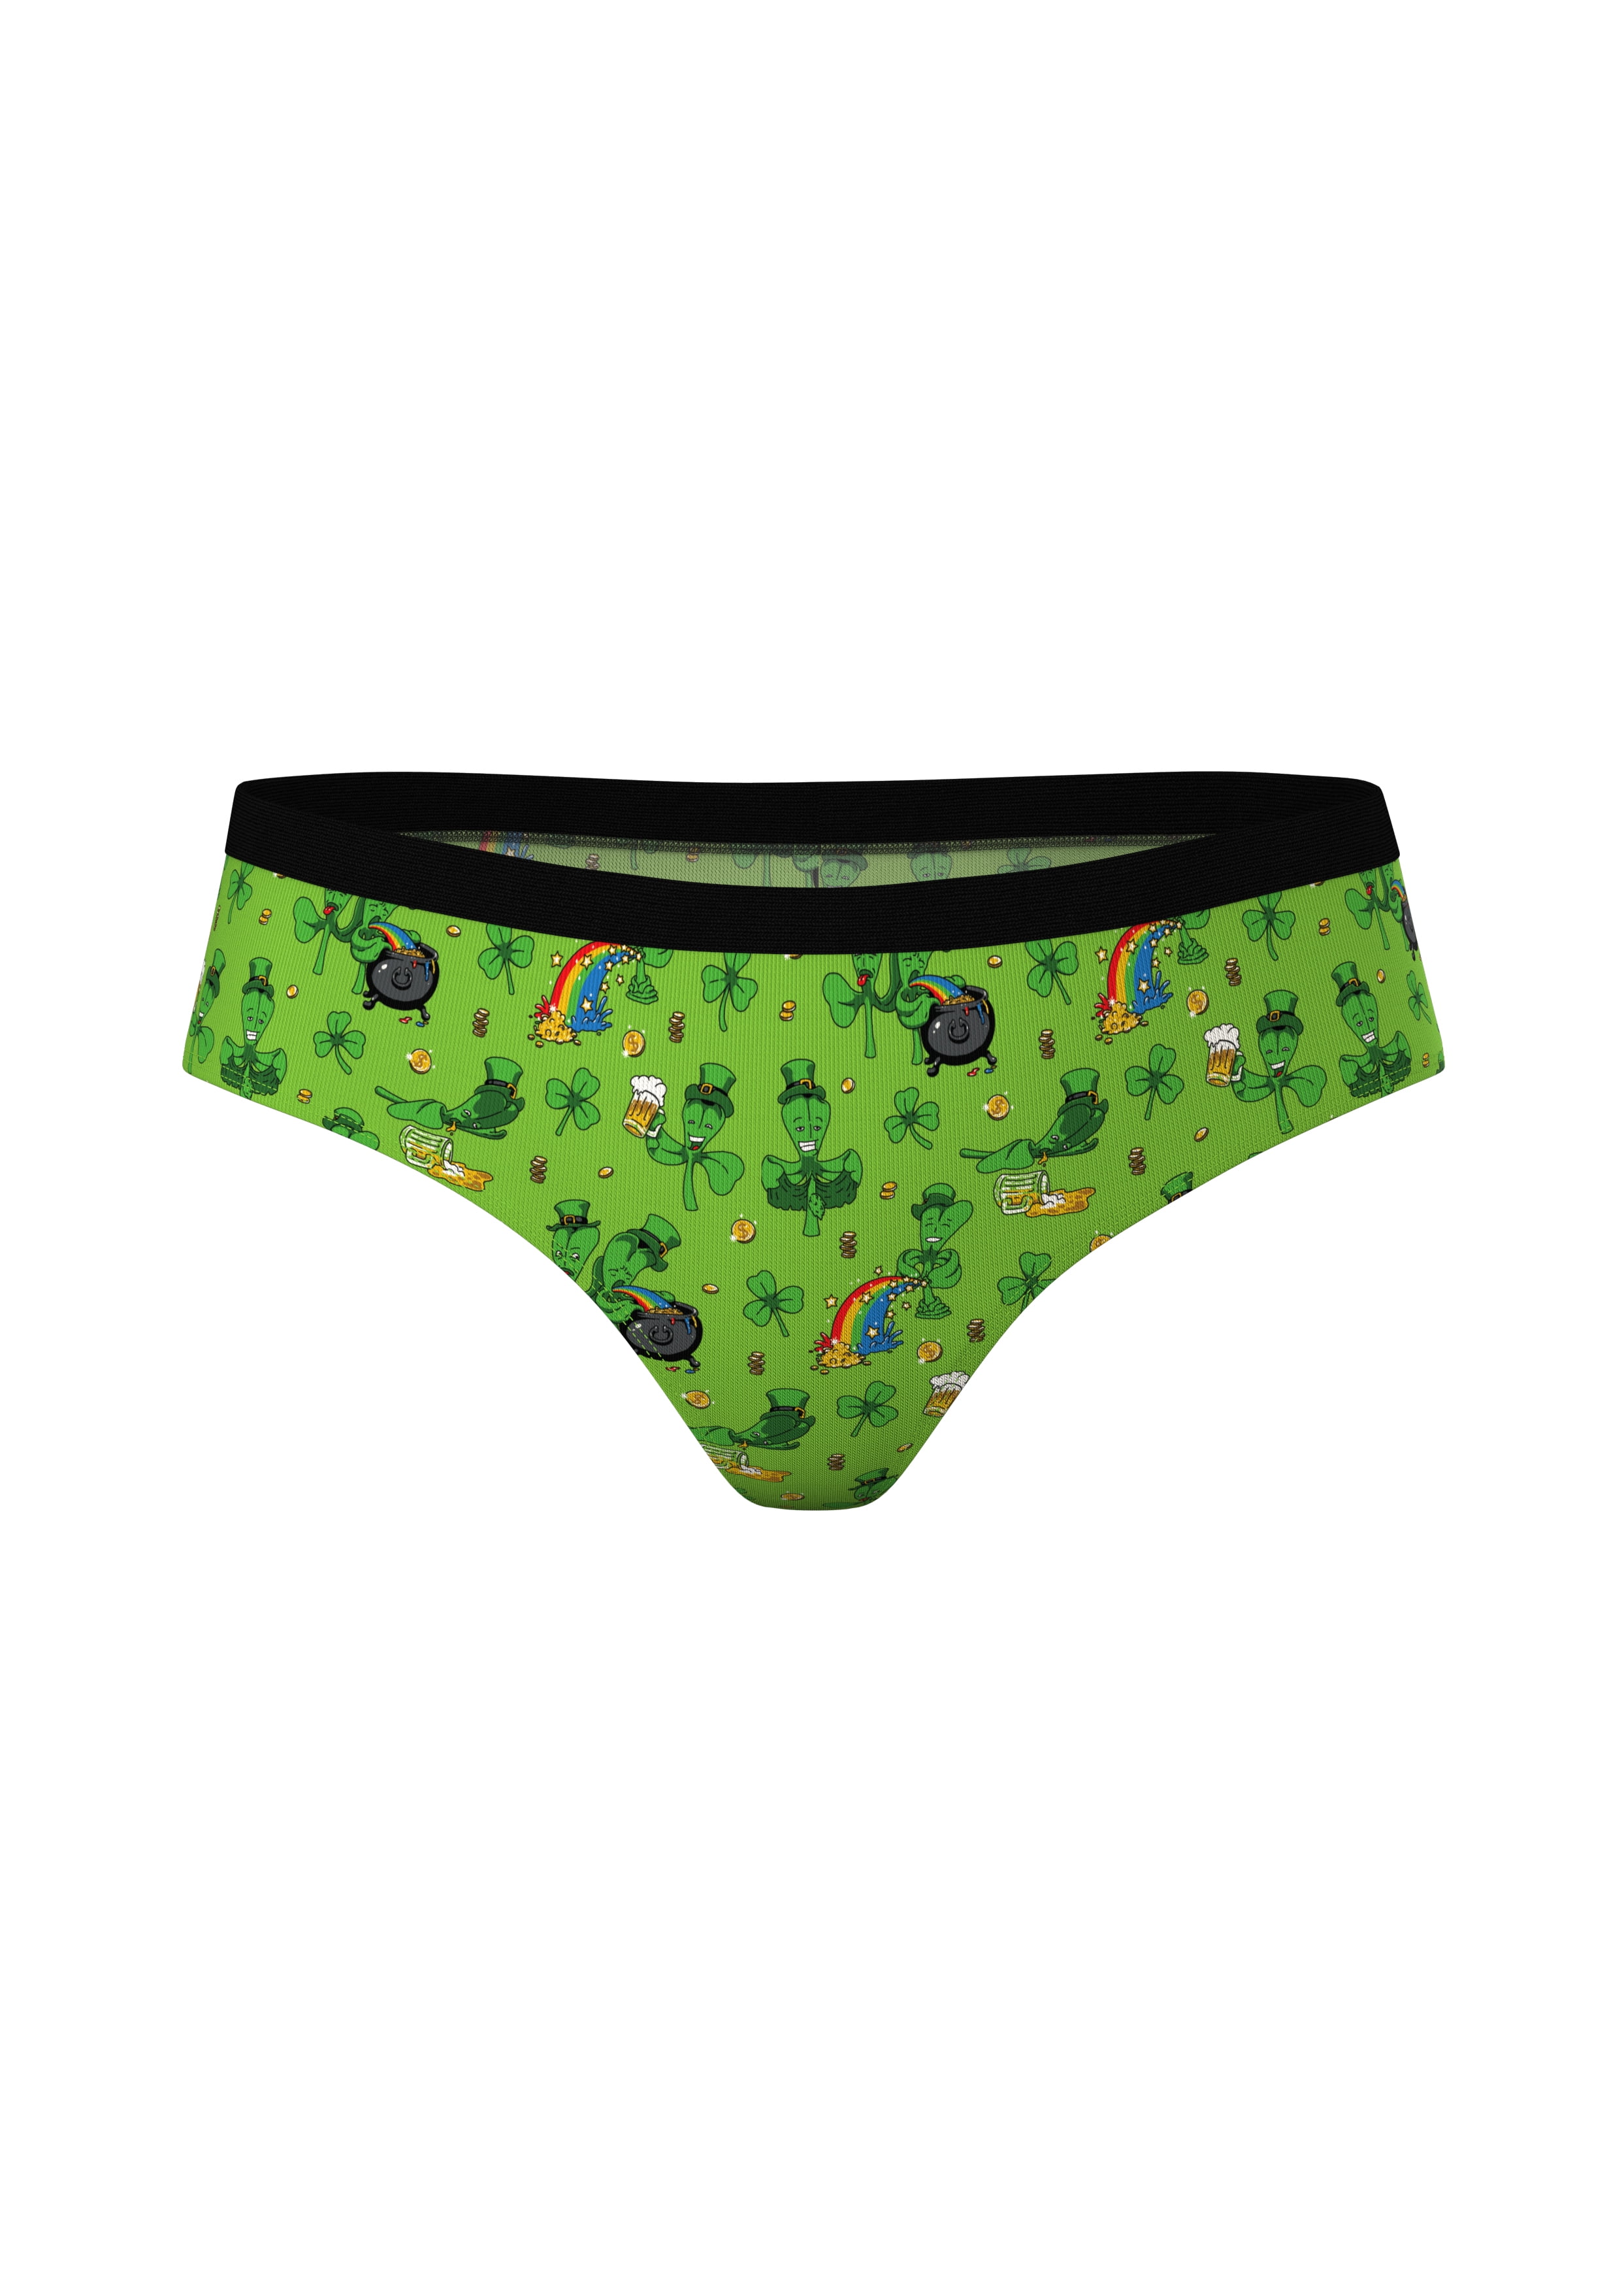 SN-C3-1 Italy Yamamay Leaf Green See-Through Lace Cheeky Hipster